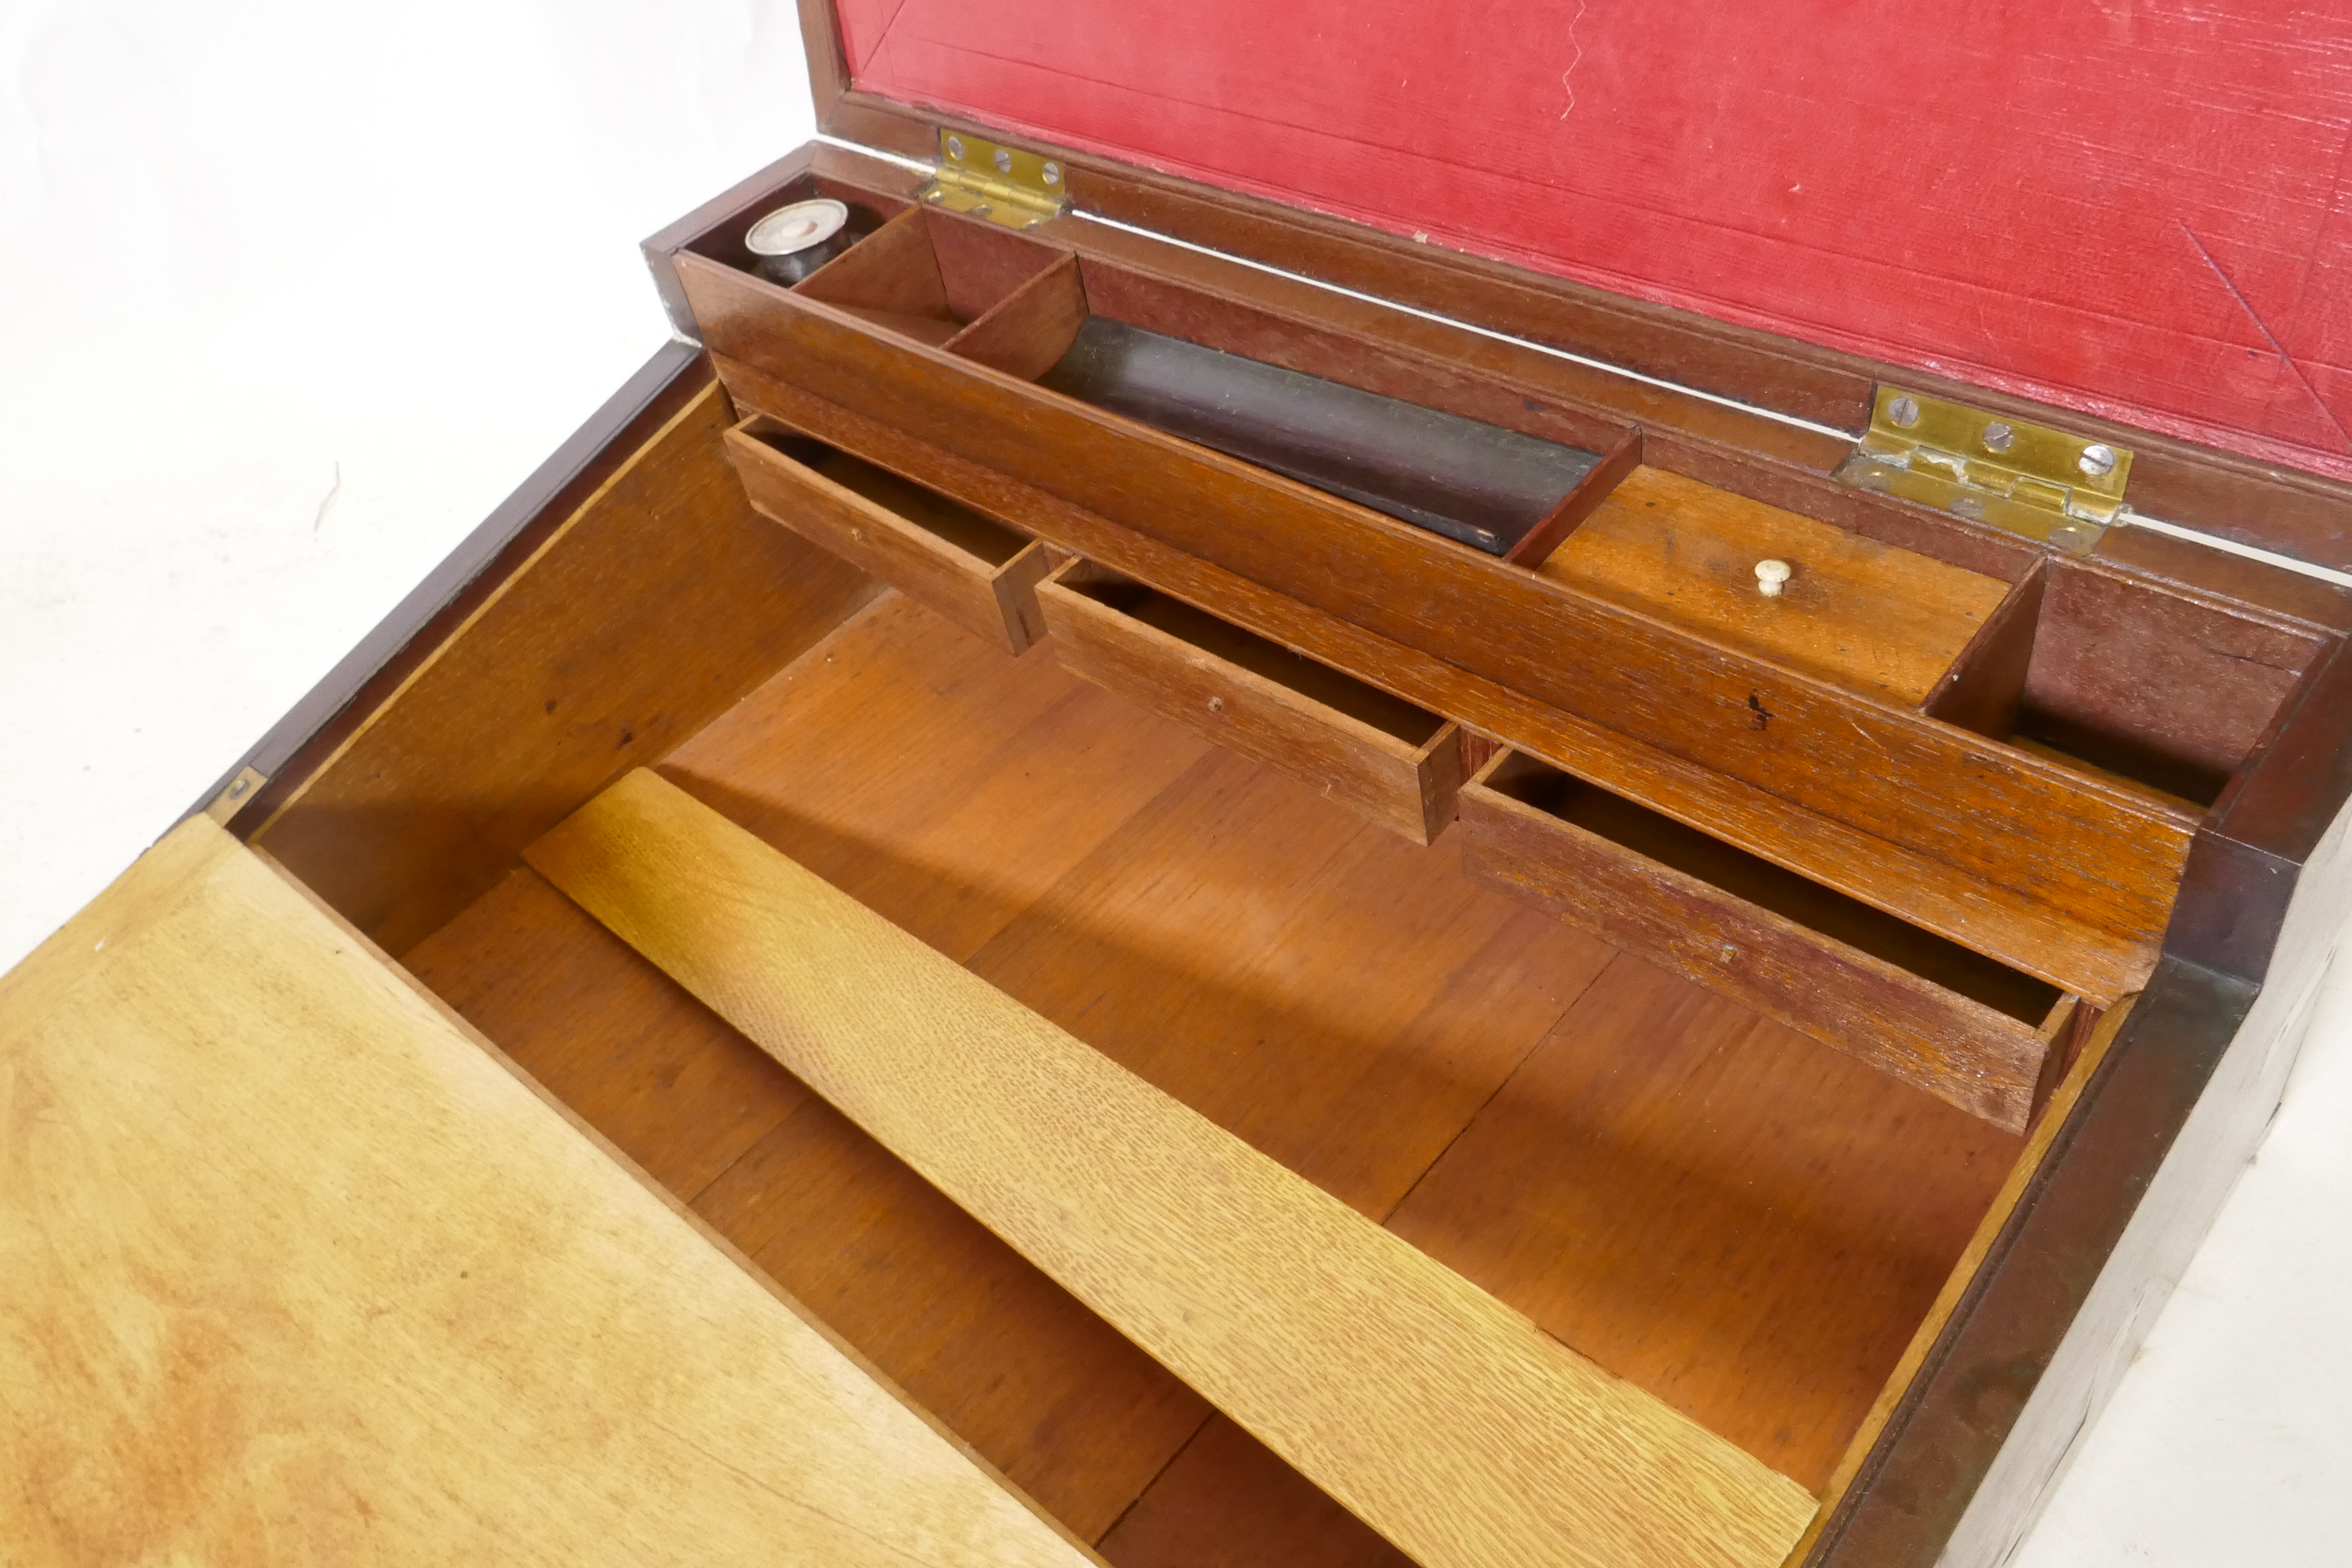 A C19th mahogany campaign writing slope with brass mounts and military style carrying handles, the - Image 6 of 8